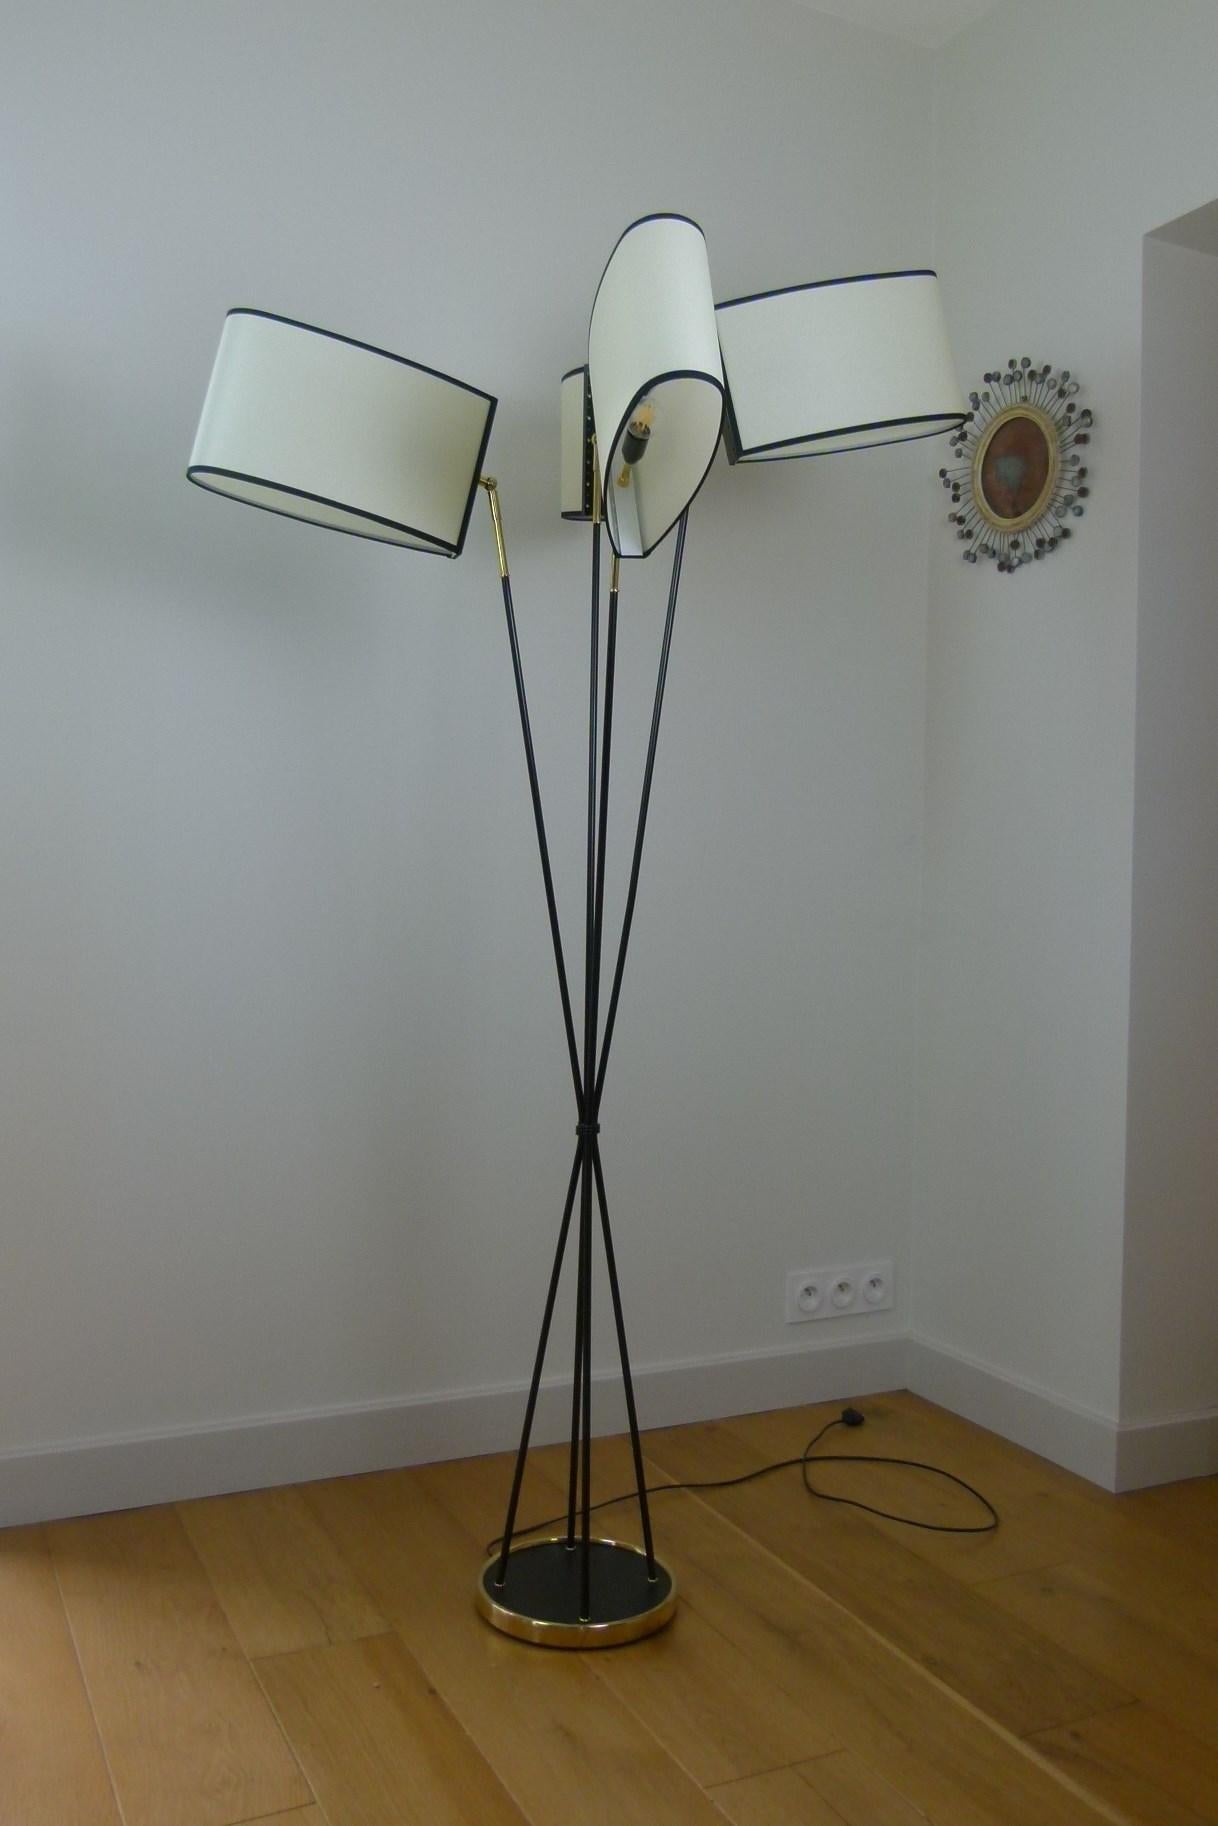 Pair of floor lamp in lacquered metal and brass,
composed of a circular base in black lacquered cast iron, set with a brass ring, on which are placed 4 arms of light in black lacquered metal and brass.
Each arm has an oval lampshade, adjustable by a